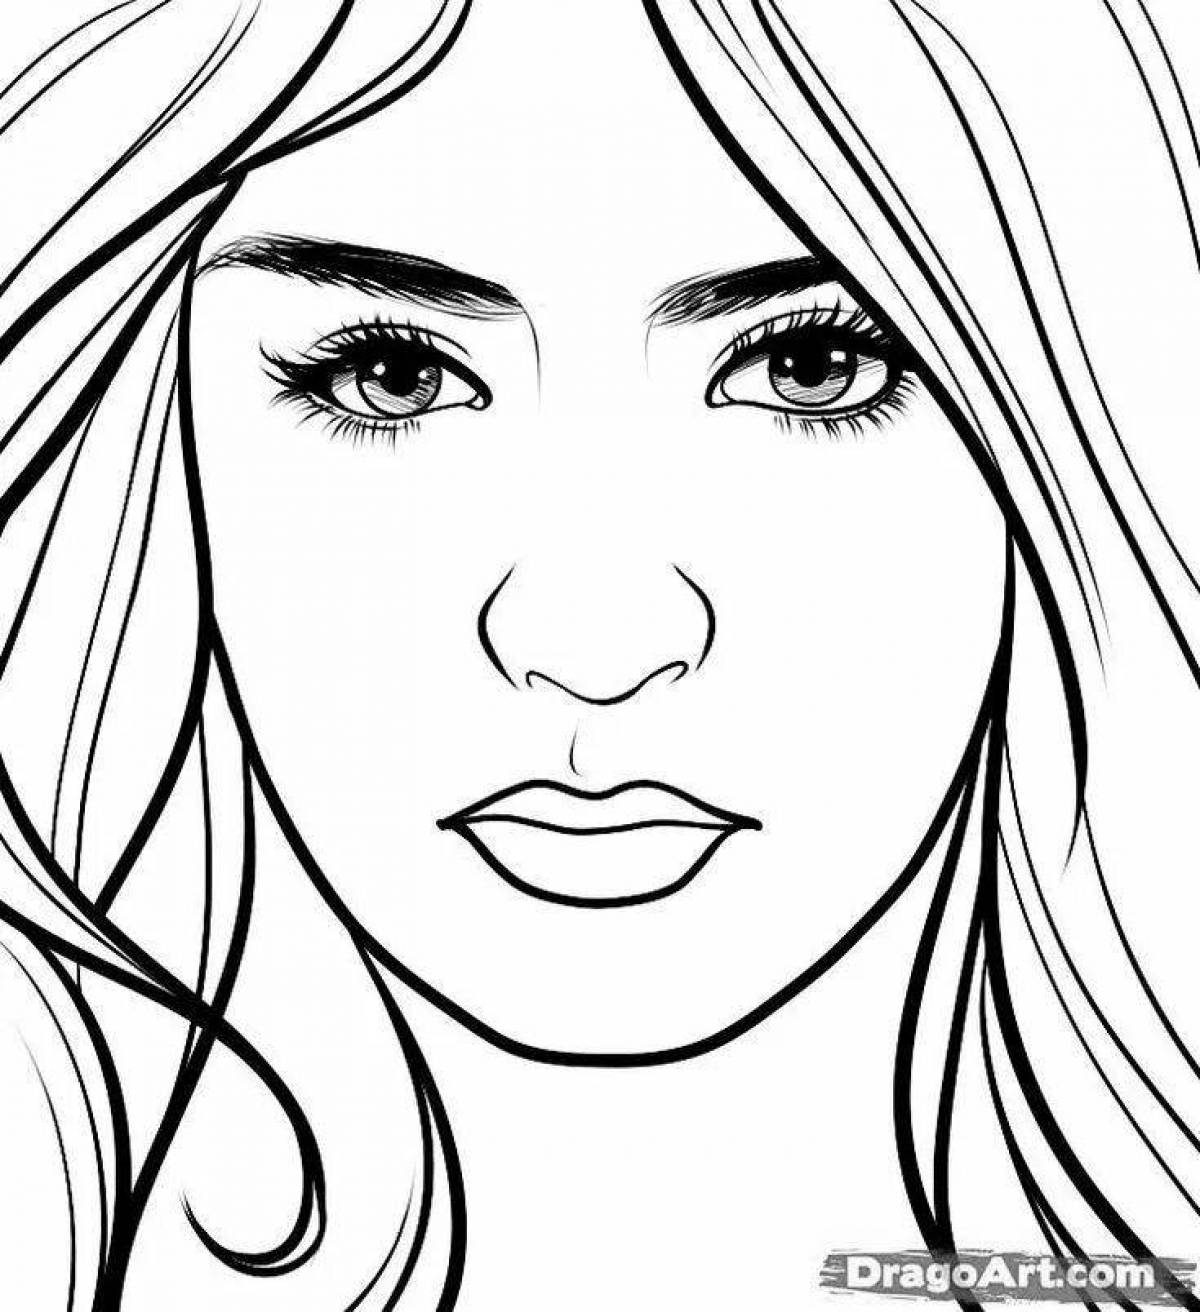 Charming female face coloring book